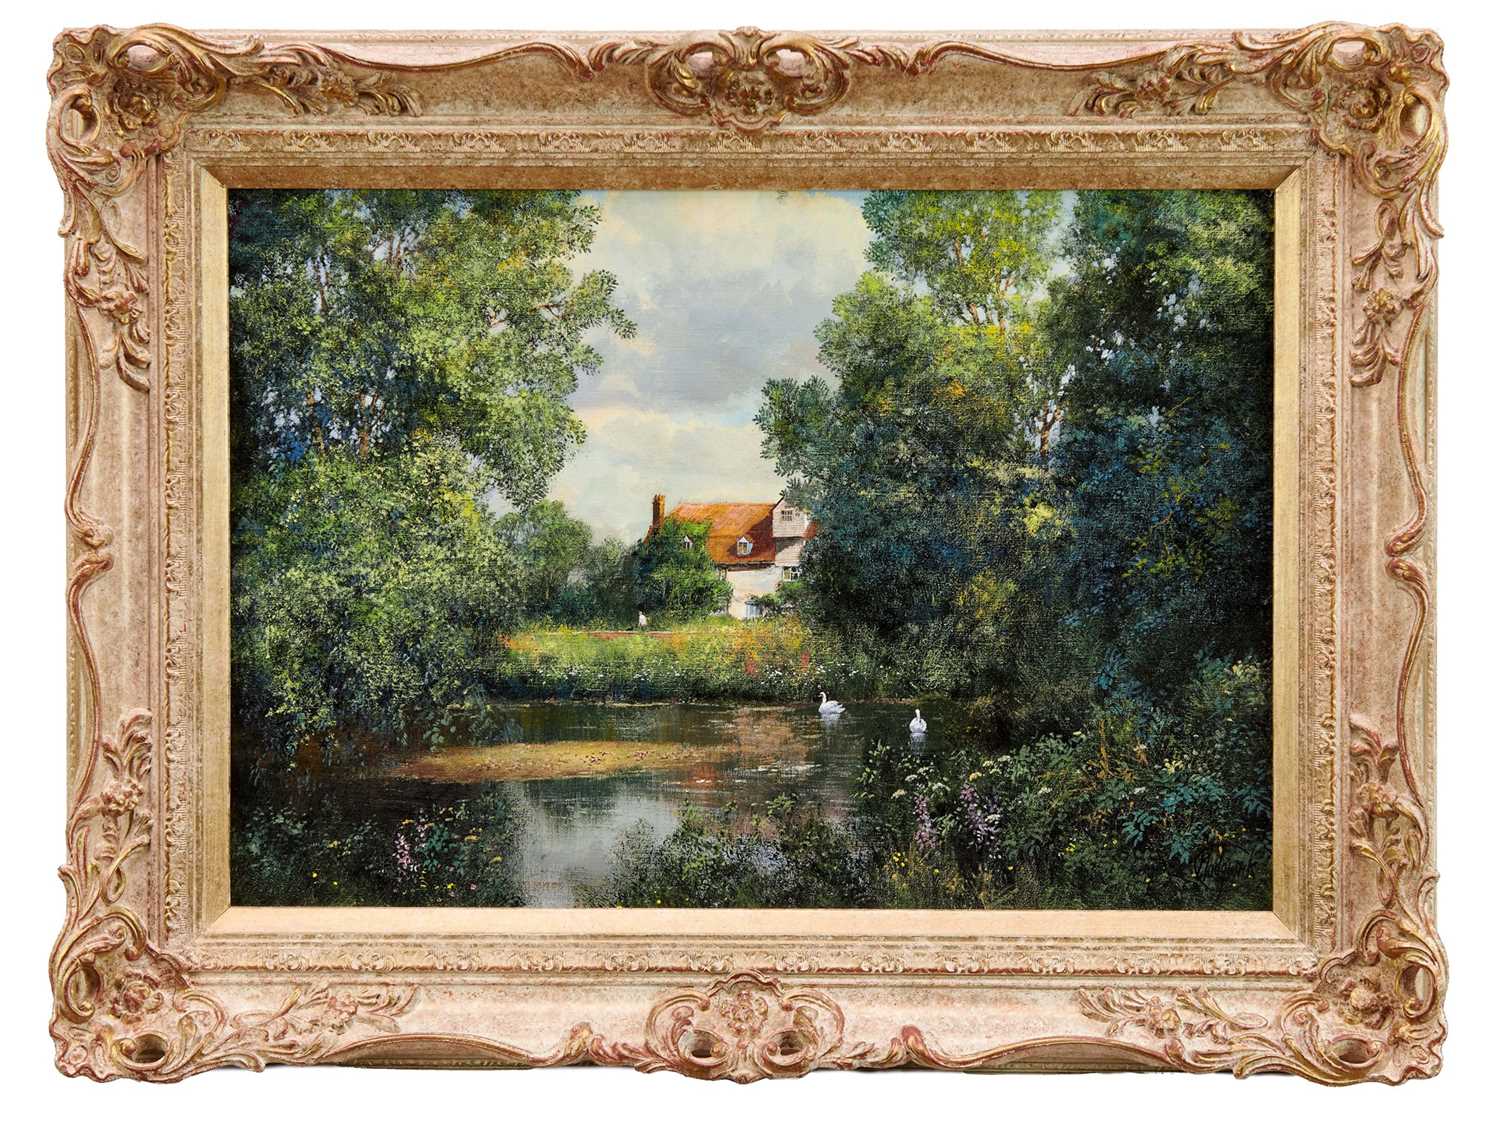 Lot 803 - *Clive Madgwick (1939-2005) oil on canvas - Brundon Mill, signed, framed